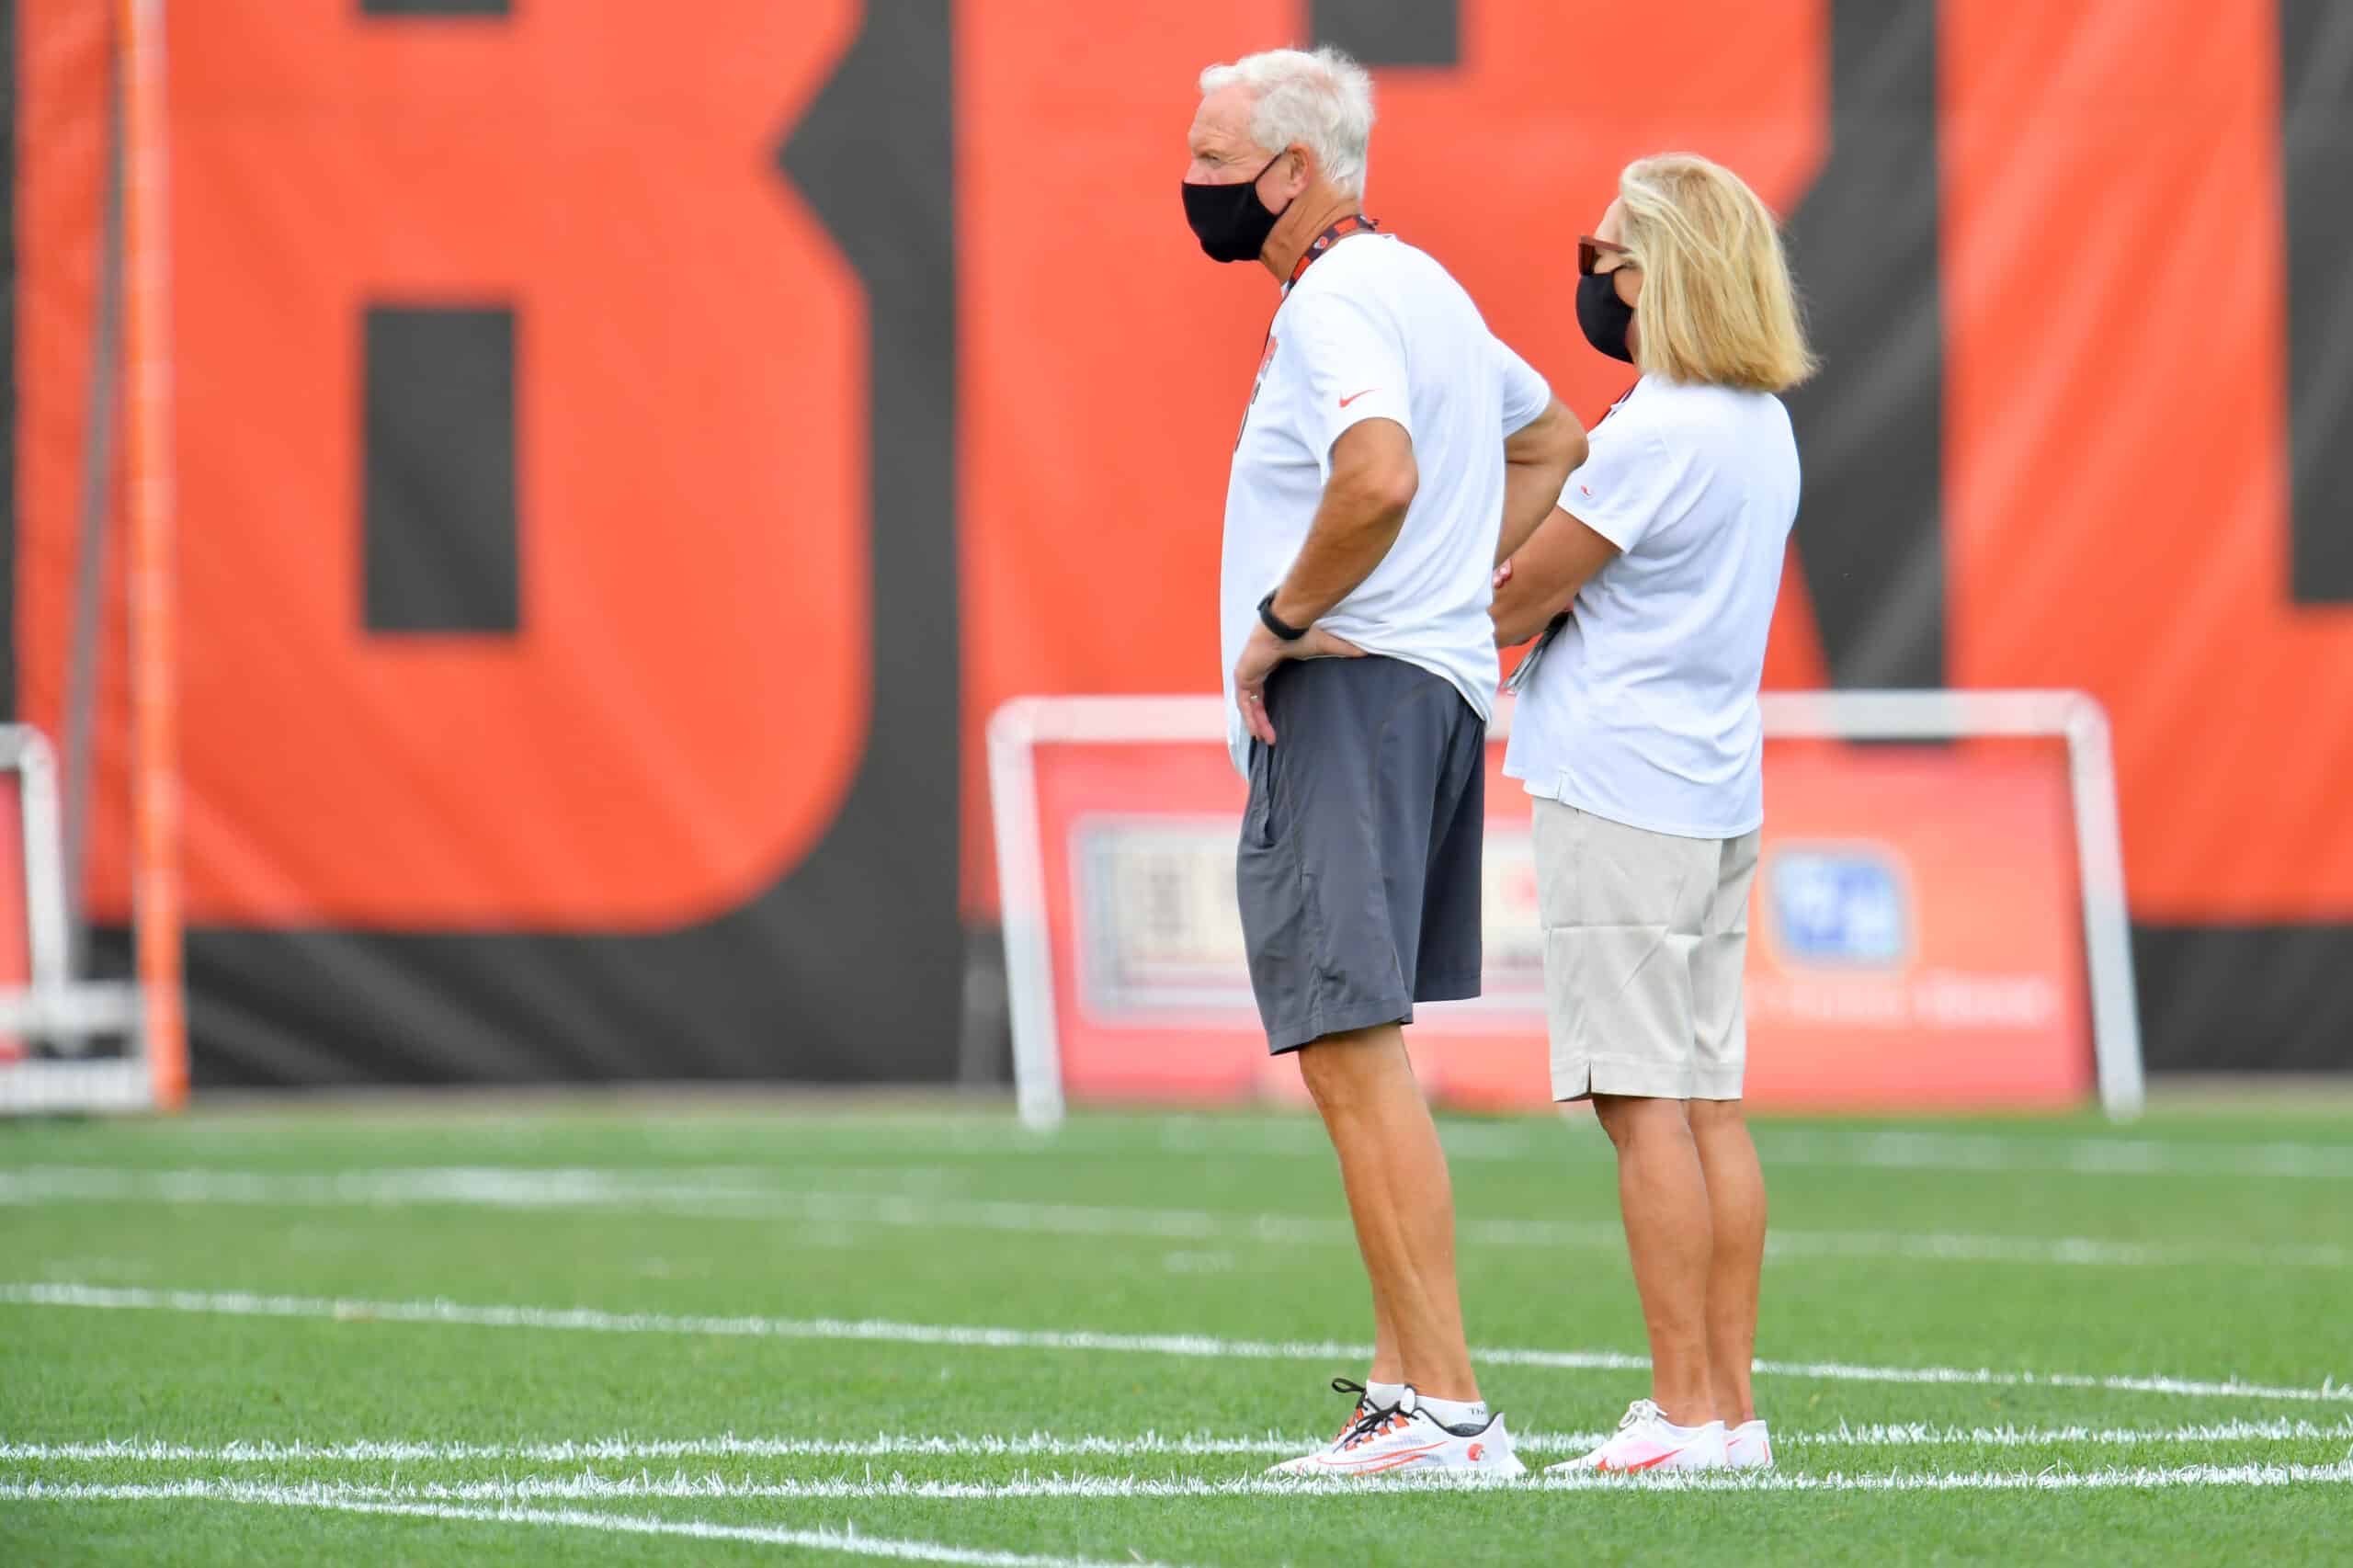 Team owners Jimmy Haslam and Dee Haslam watch training camp on August 16, 2020 at the Cleveland Browns training facility in Berea, Ohio.